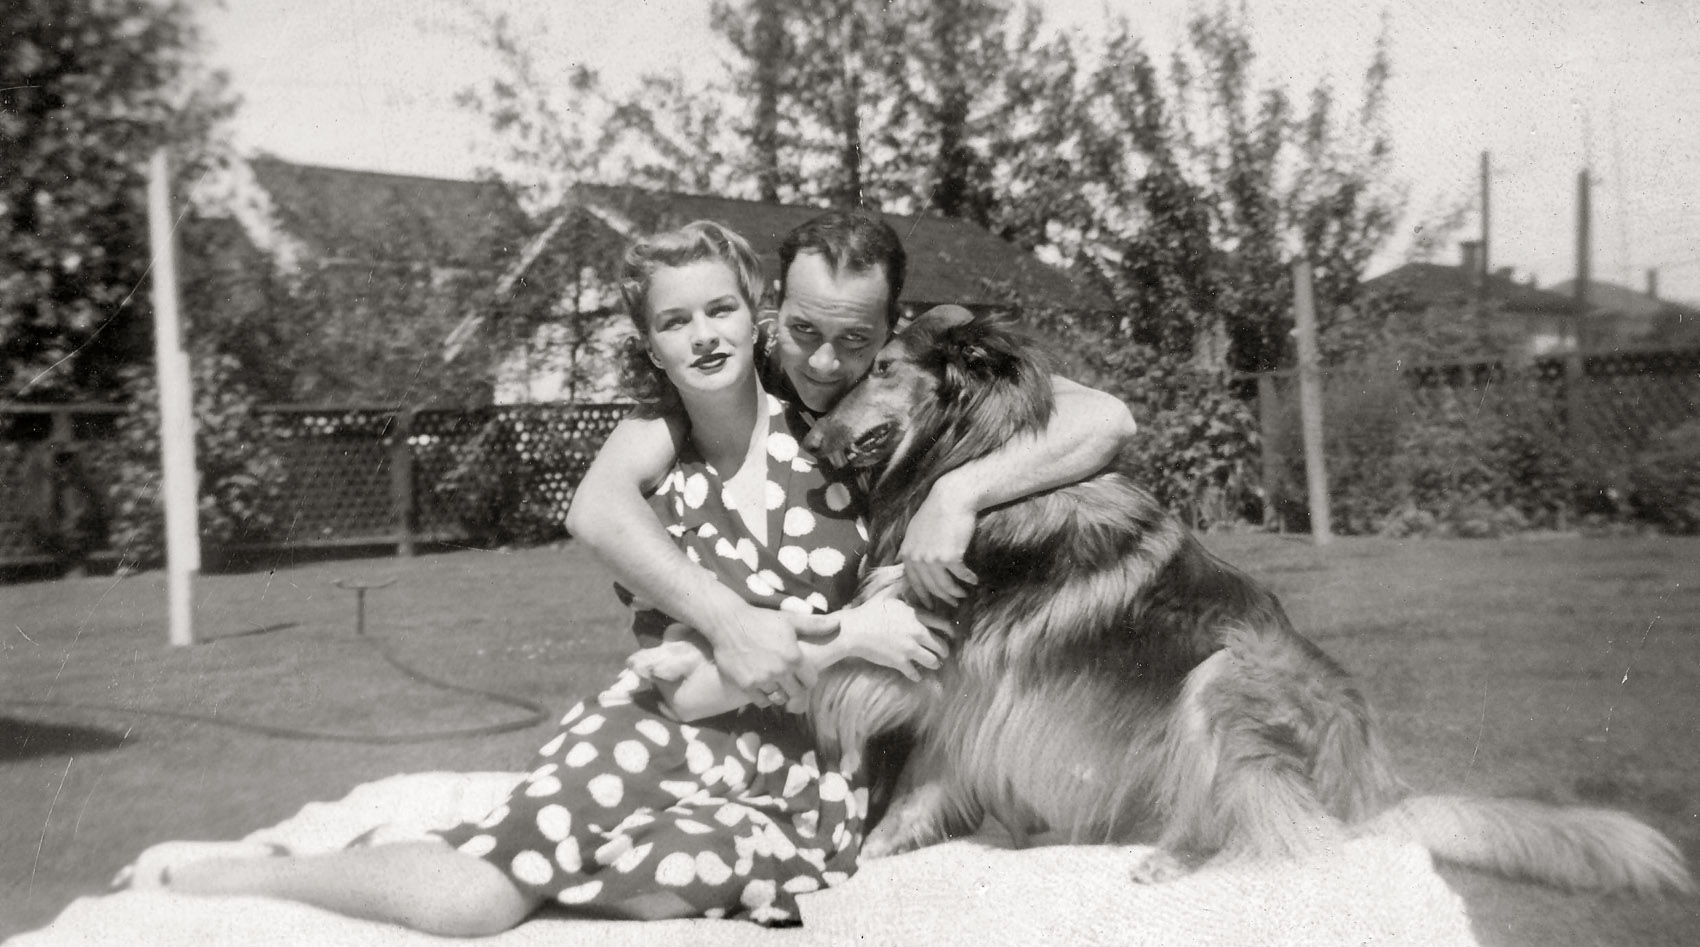 I can feel the love shown in this picture. The date is late 1940s, the place probably Vancouver, BC, in the yard of the I'Anson home. King Tut, their collie, was the hero of the neighborhood, as he rescued a neighbor's small dog from a "dog pack" that was picking on him. That's Dad (Tom Jr.) and Mom (Marilyn Gardner). View full size.